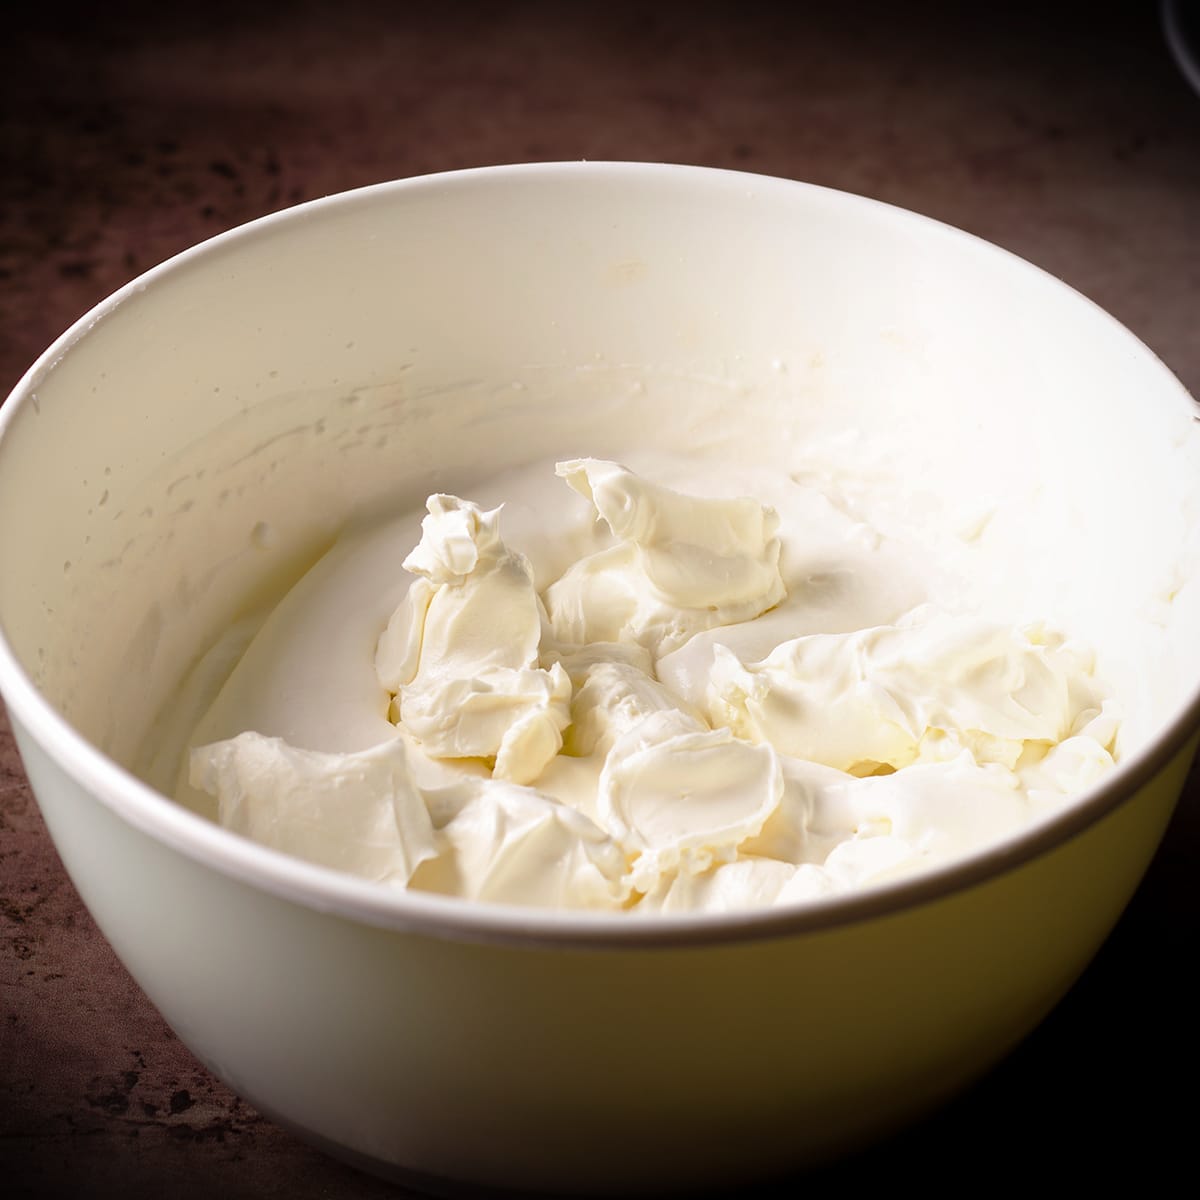 A white bowl filled with whipped cream and pieces of cream cheese.